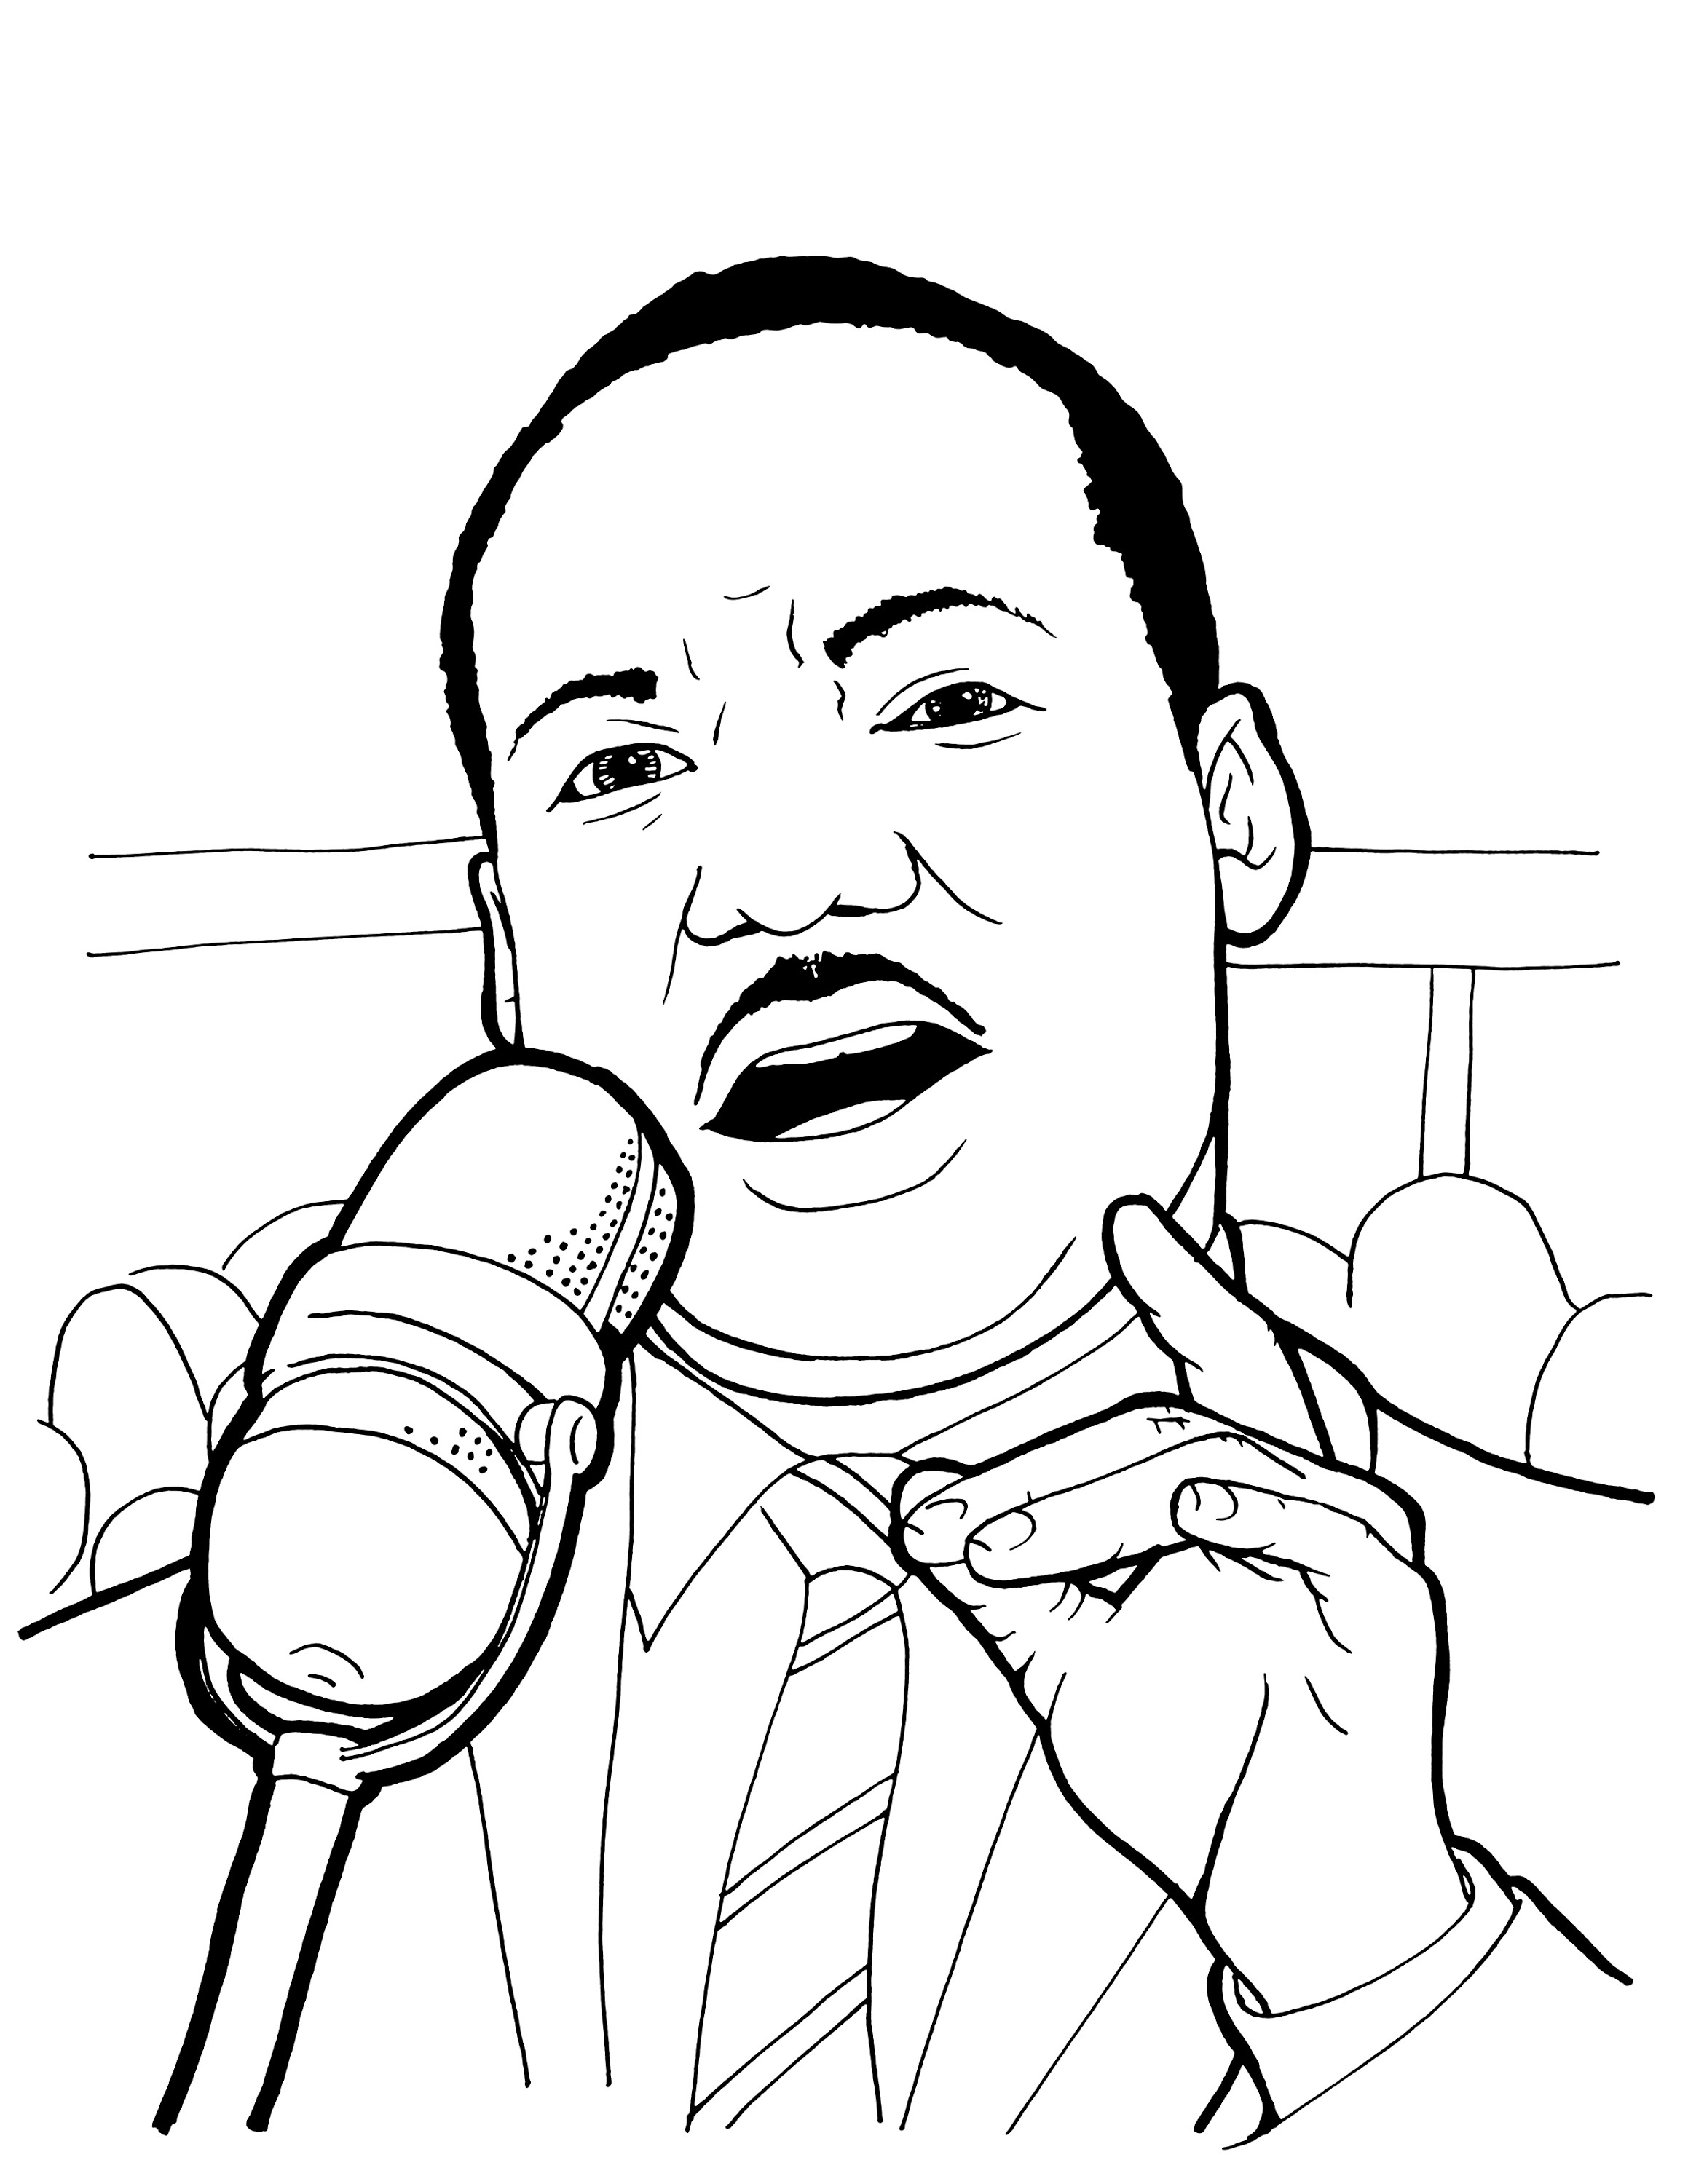 Martin Luther King Coloring Pages Printable at Free